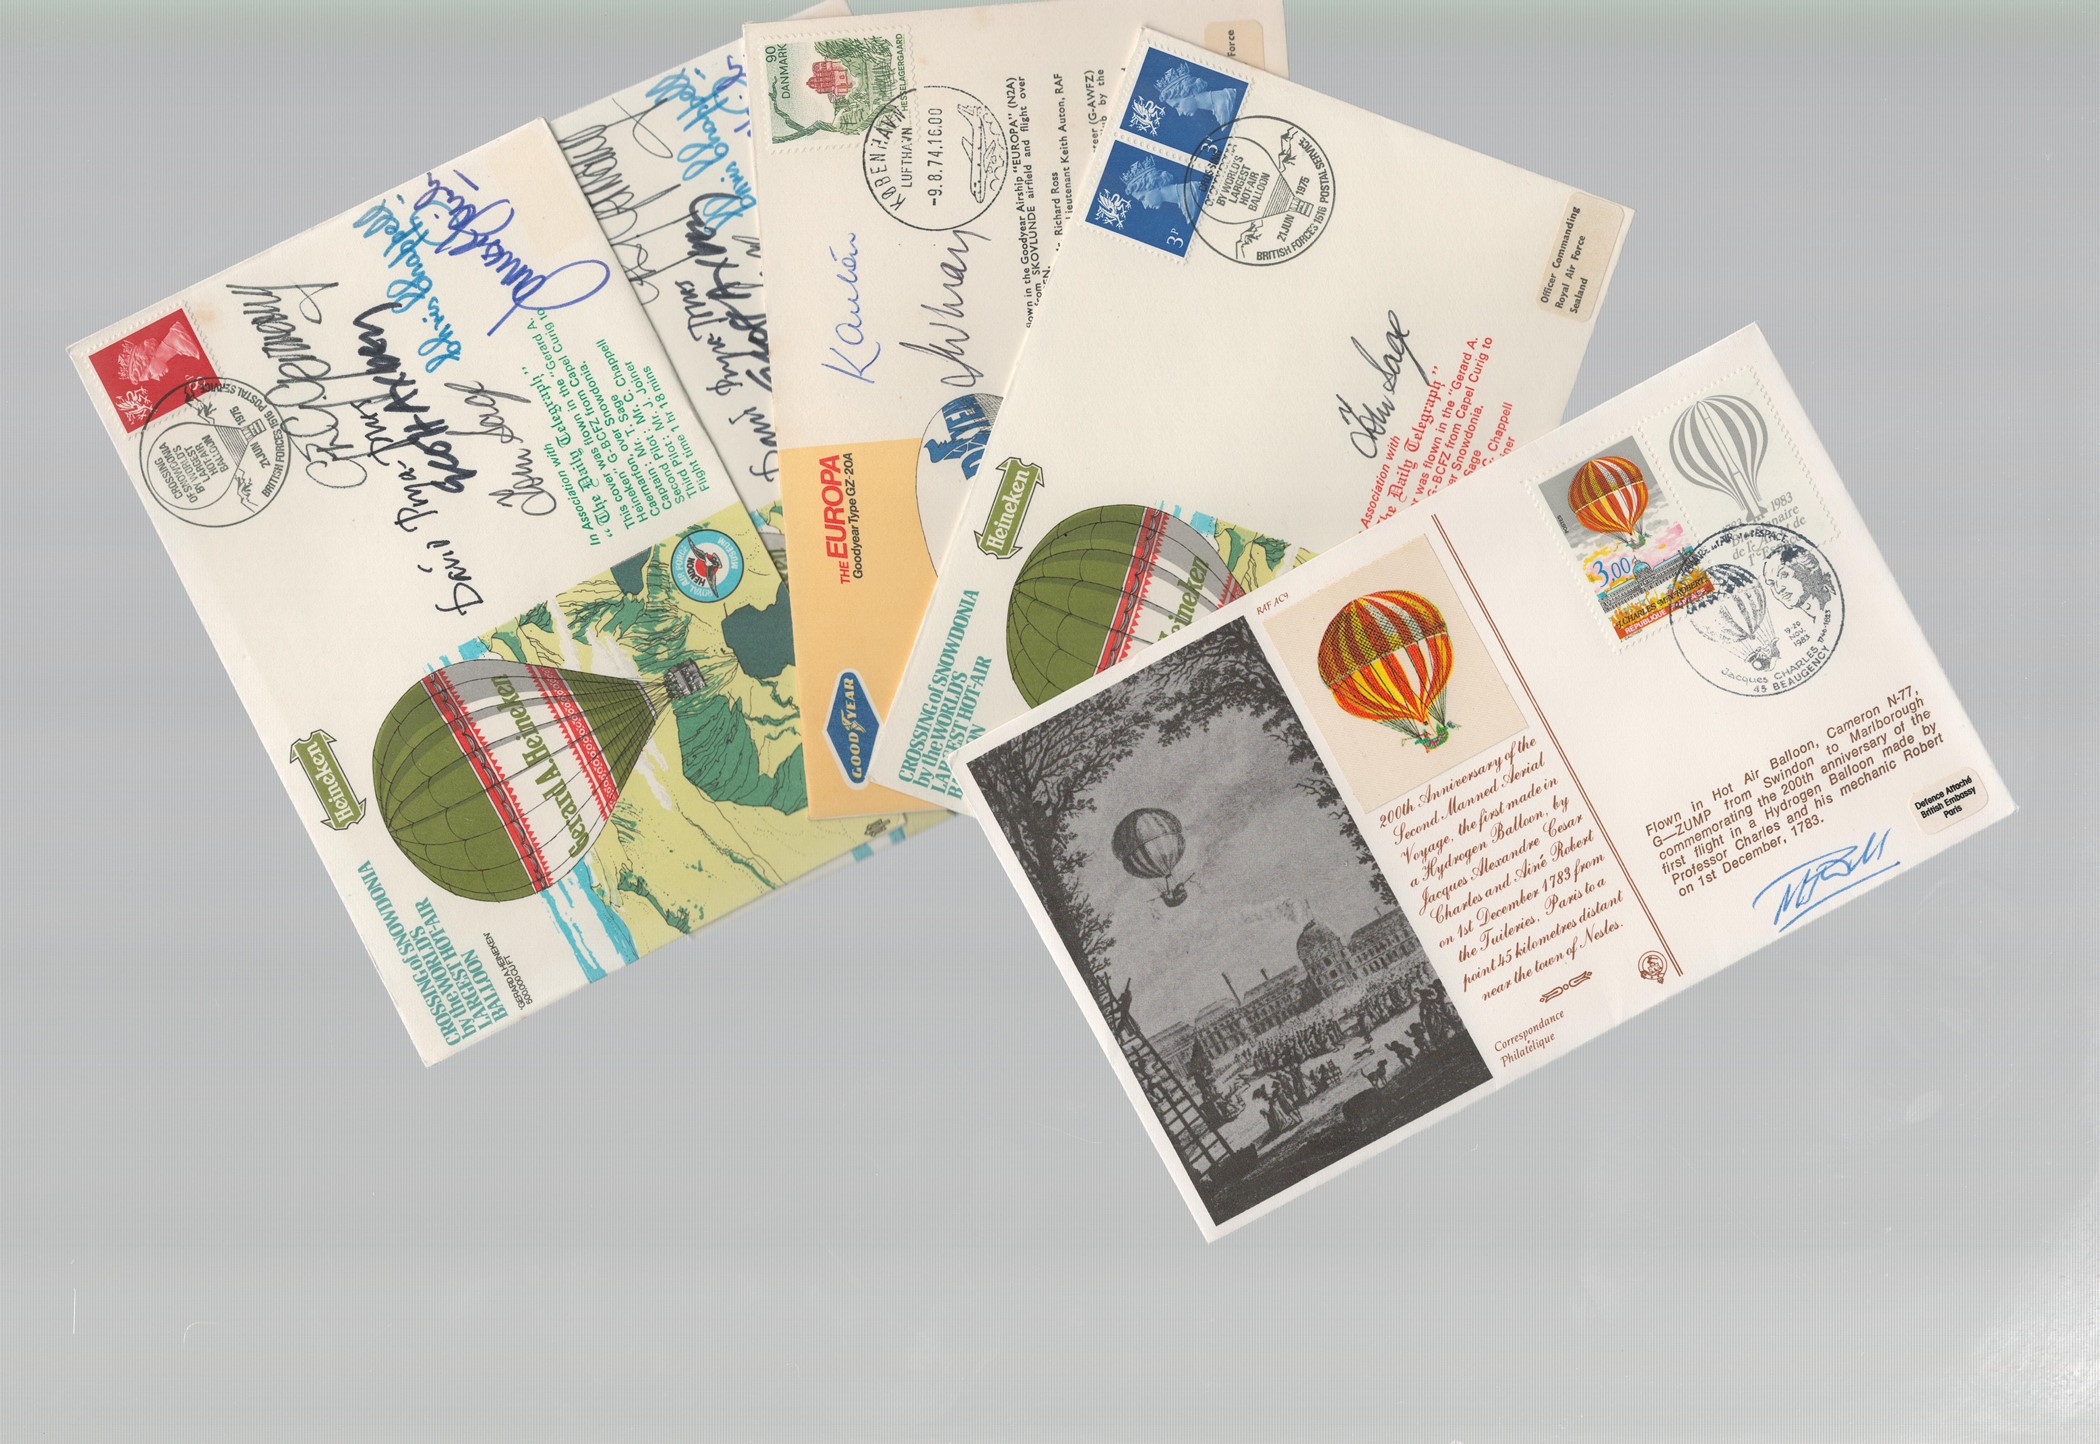 Air Balloons Collection of 16 FDCs signatures include T Godfrey, Tony Gowin Jones, W W Ballantyne, - Image 4 of 6